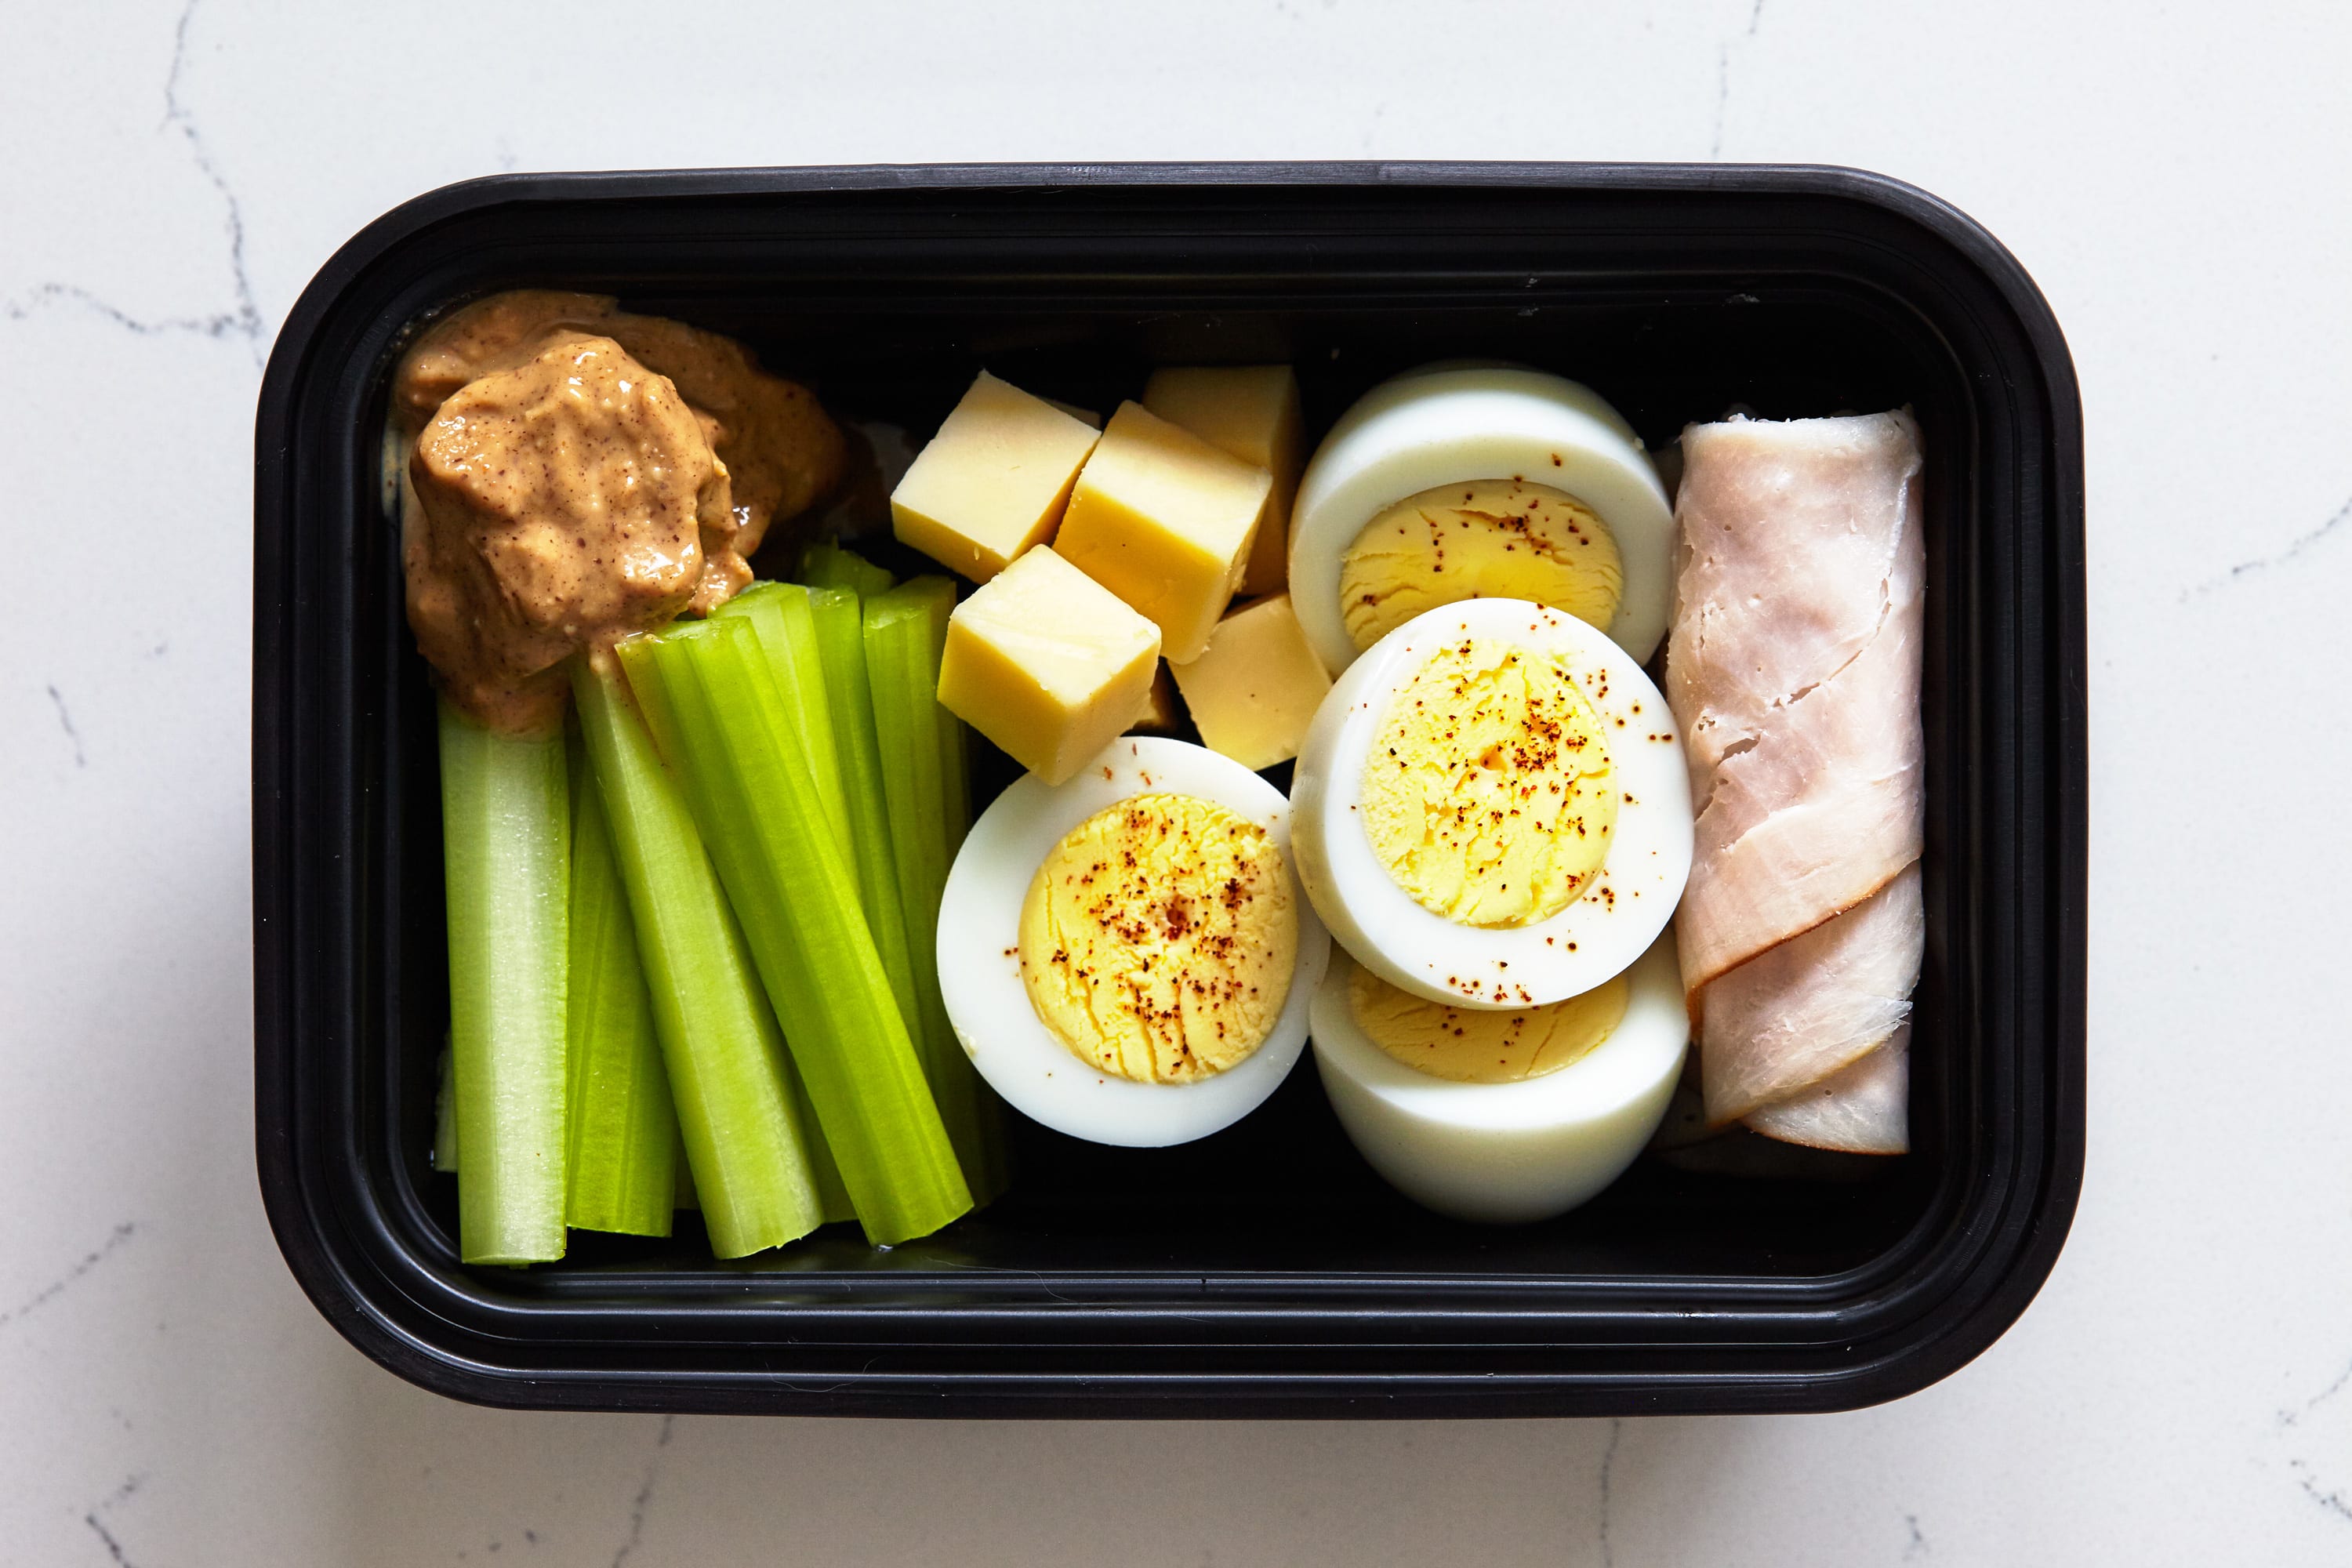 Simple No Cook Snacks with Celery, Peanut Butter, Eggs, turkey